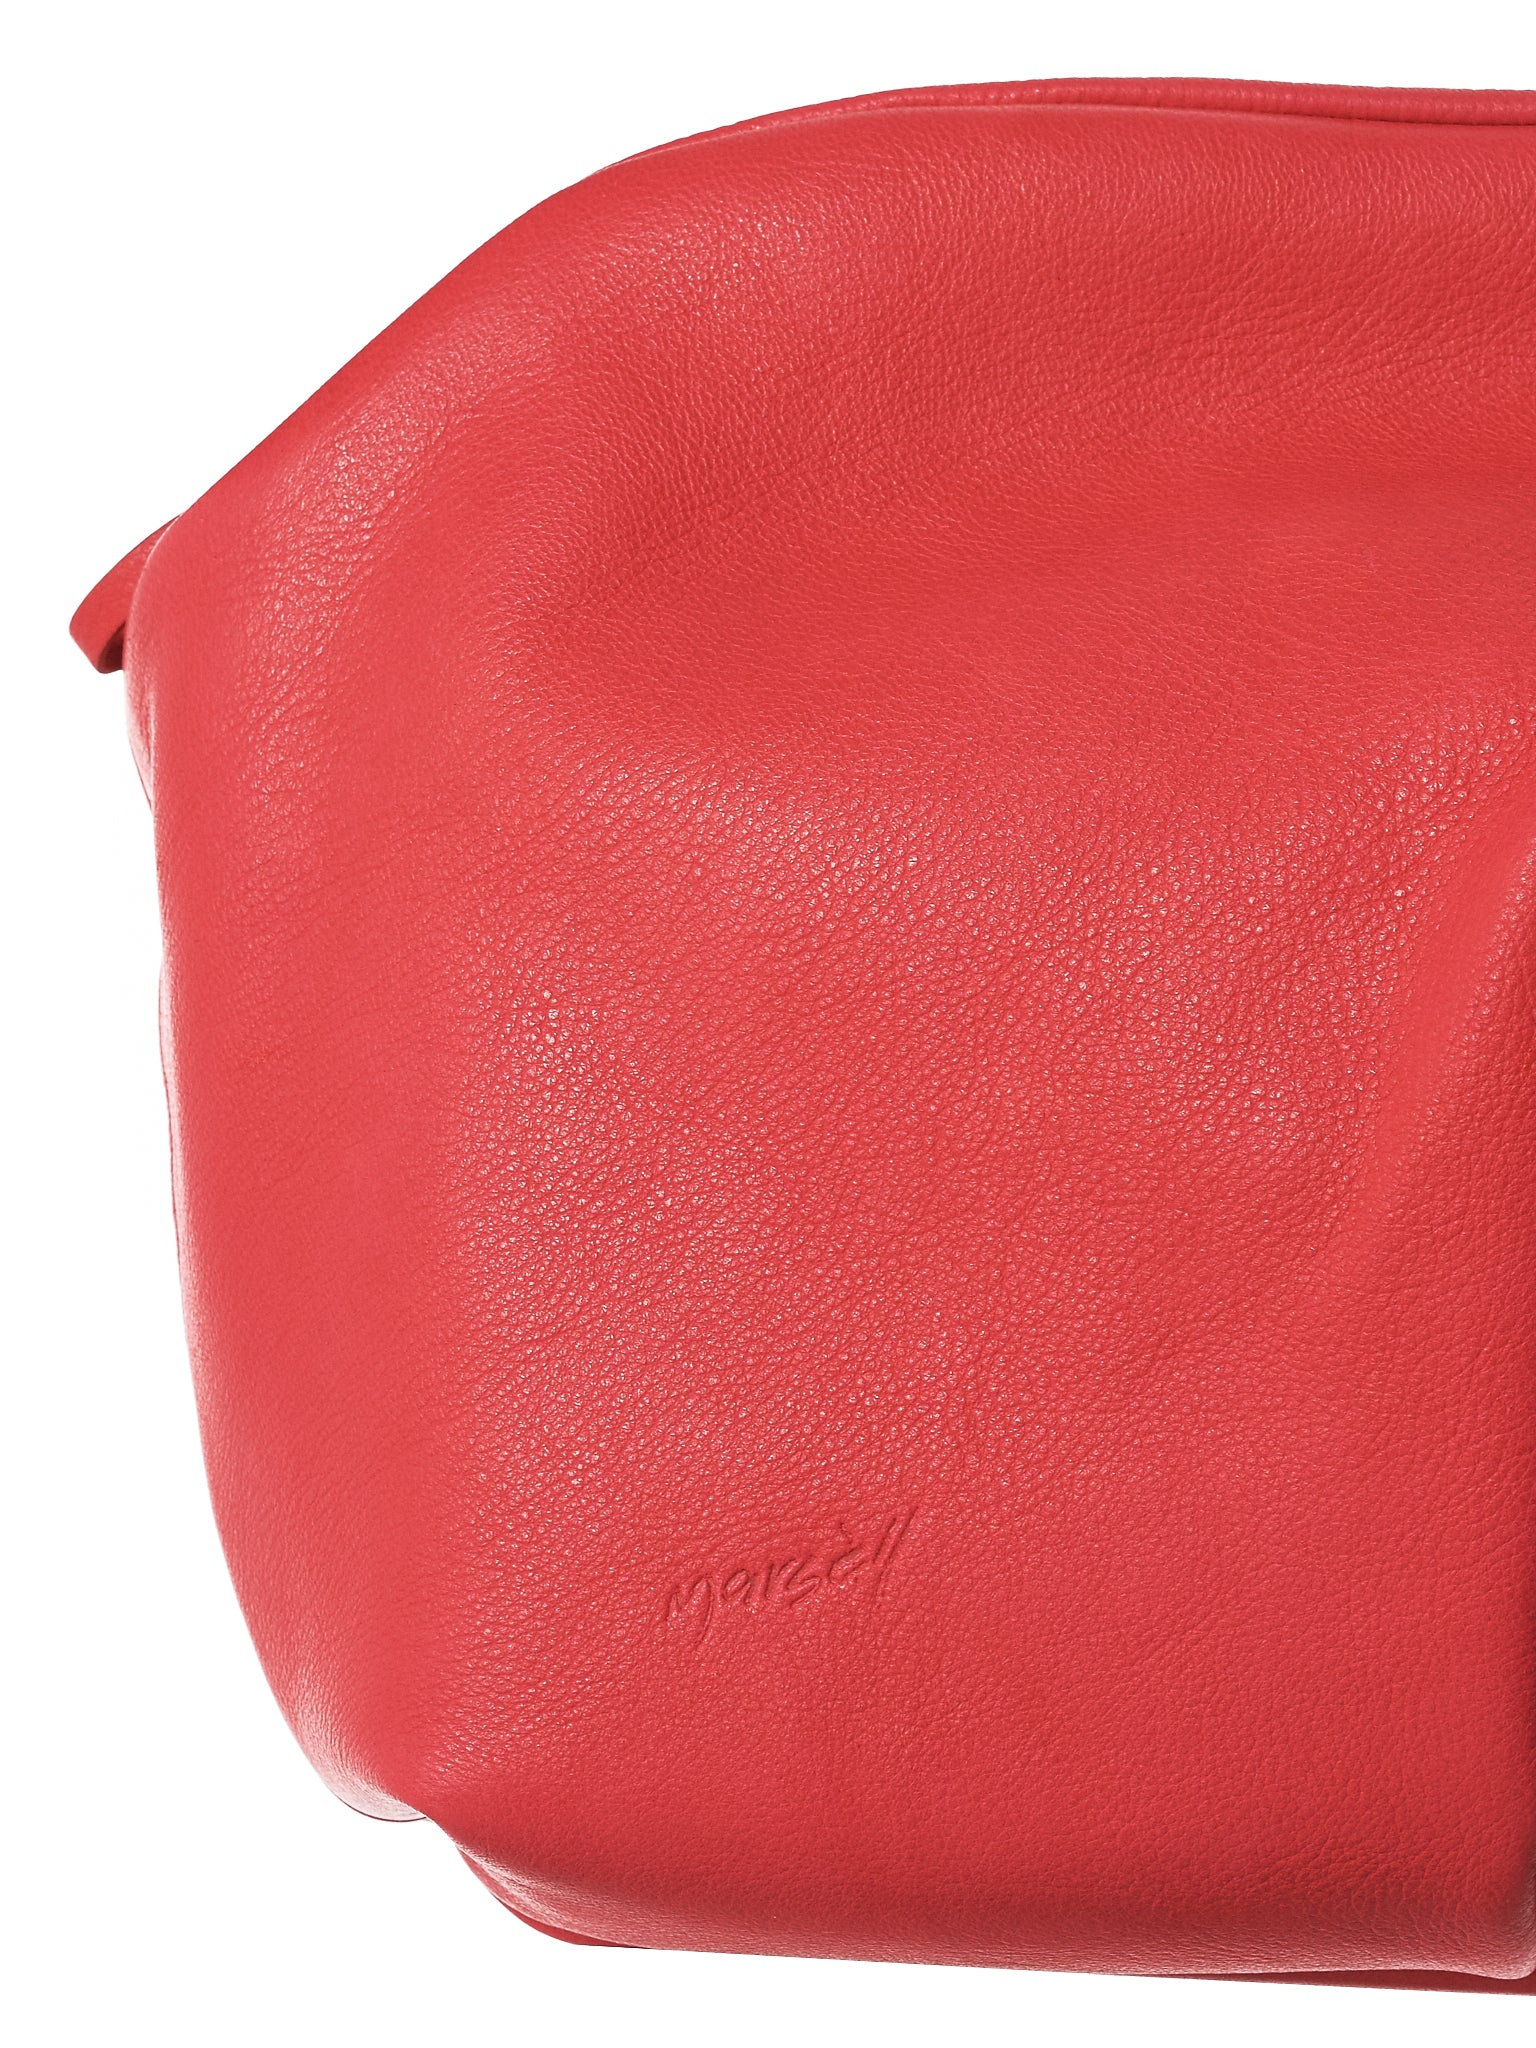 Marsell Leather Purse - Hlorenzo Detail 1